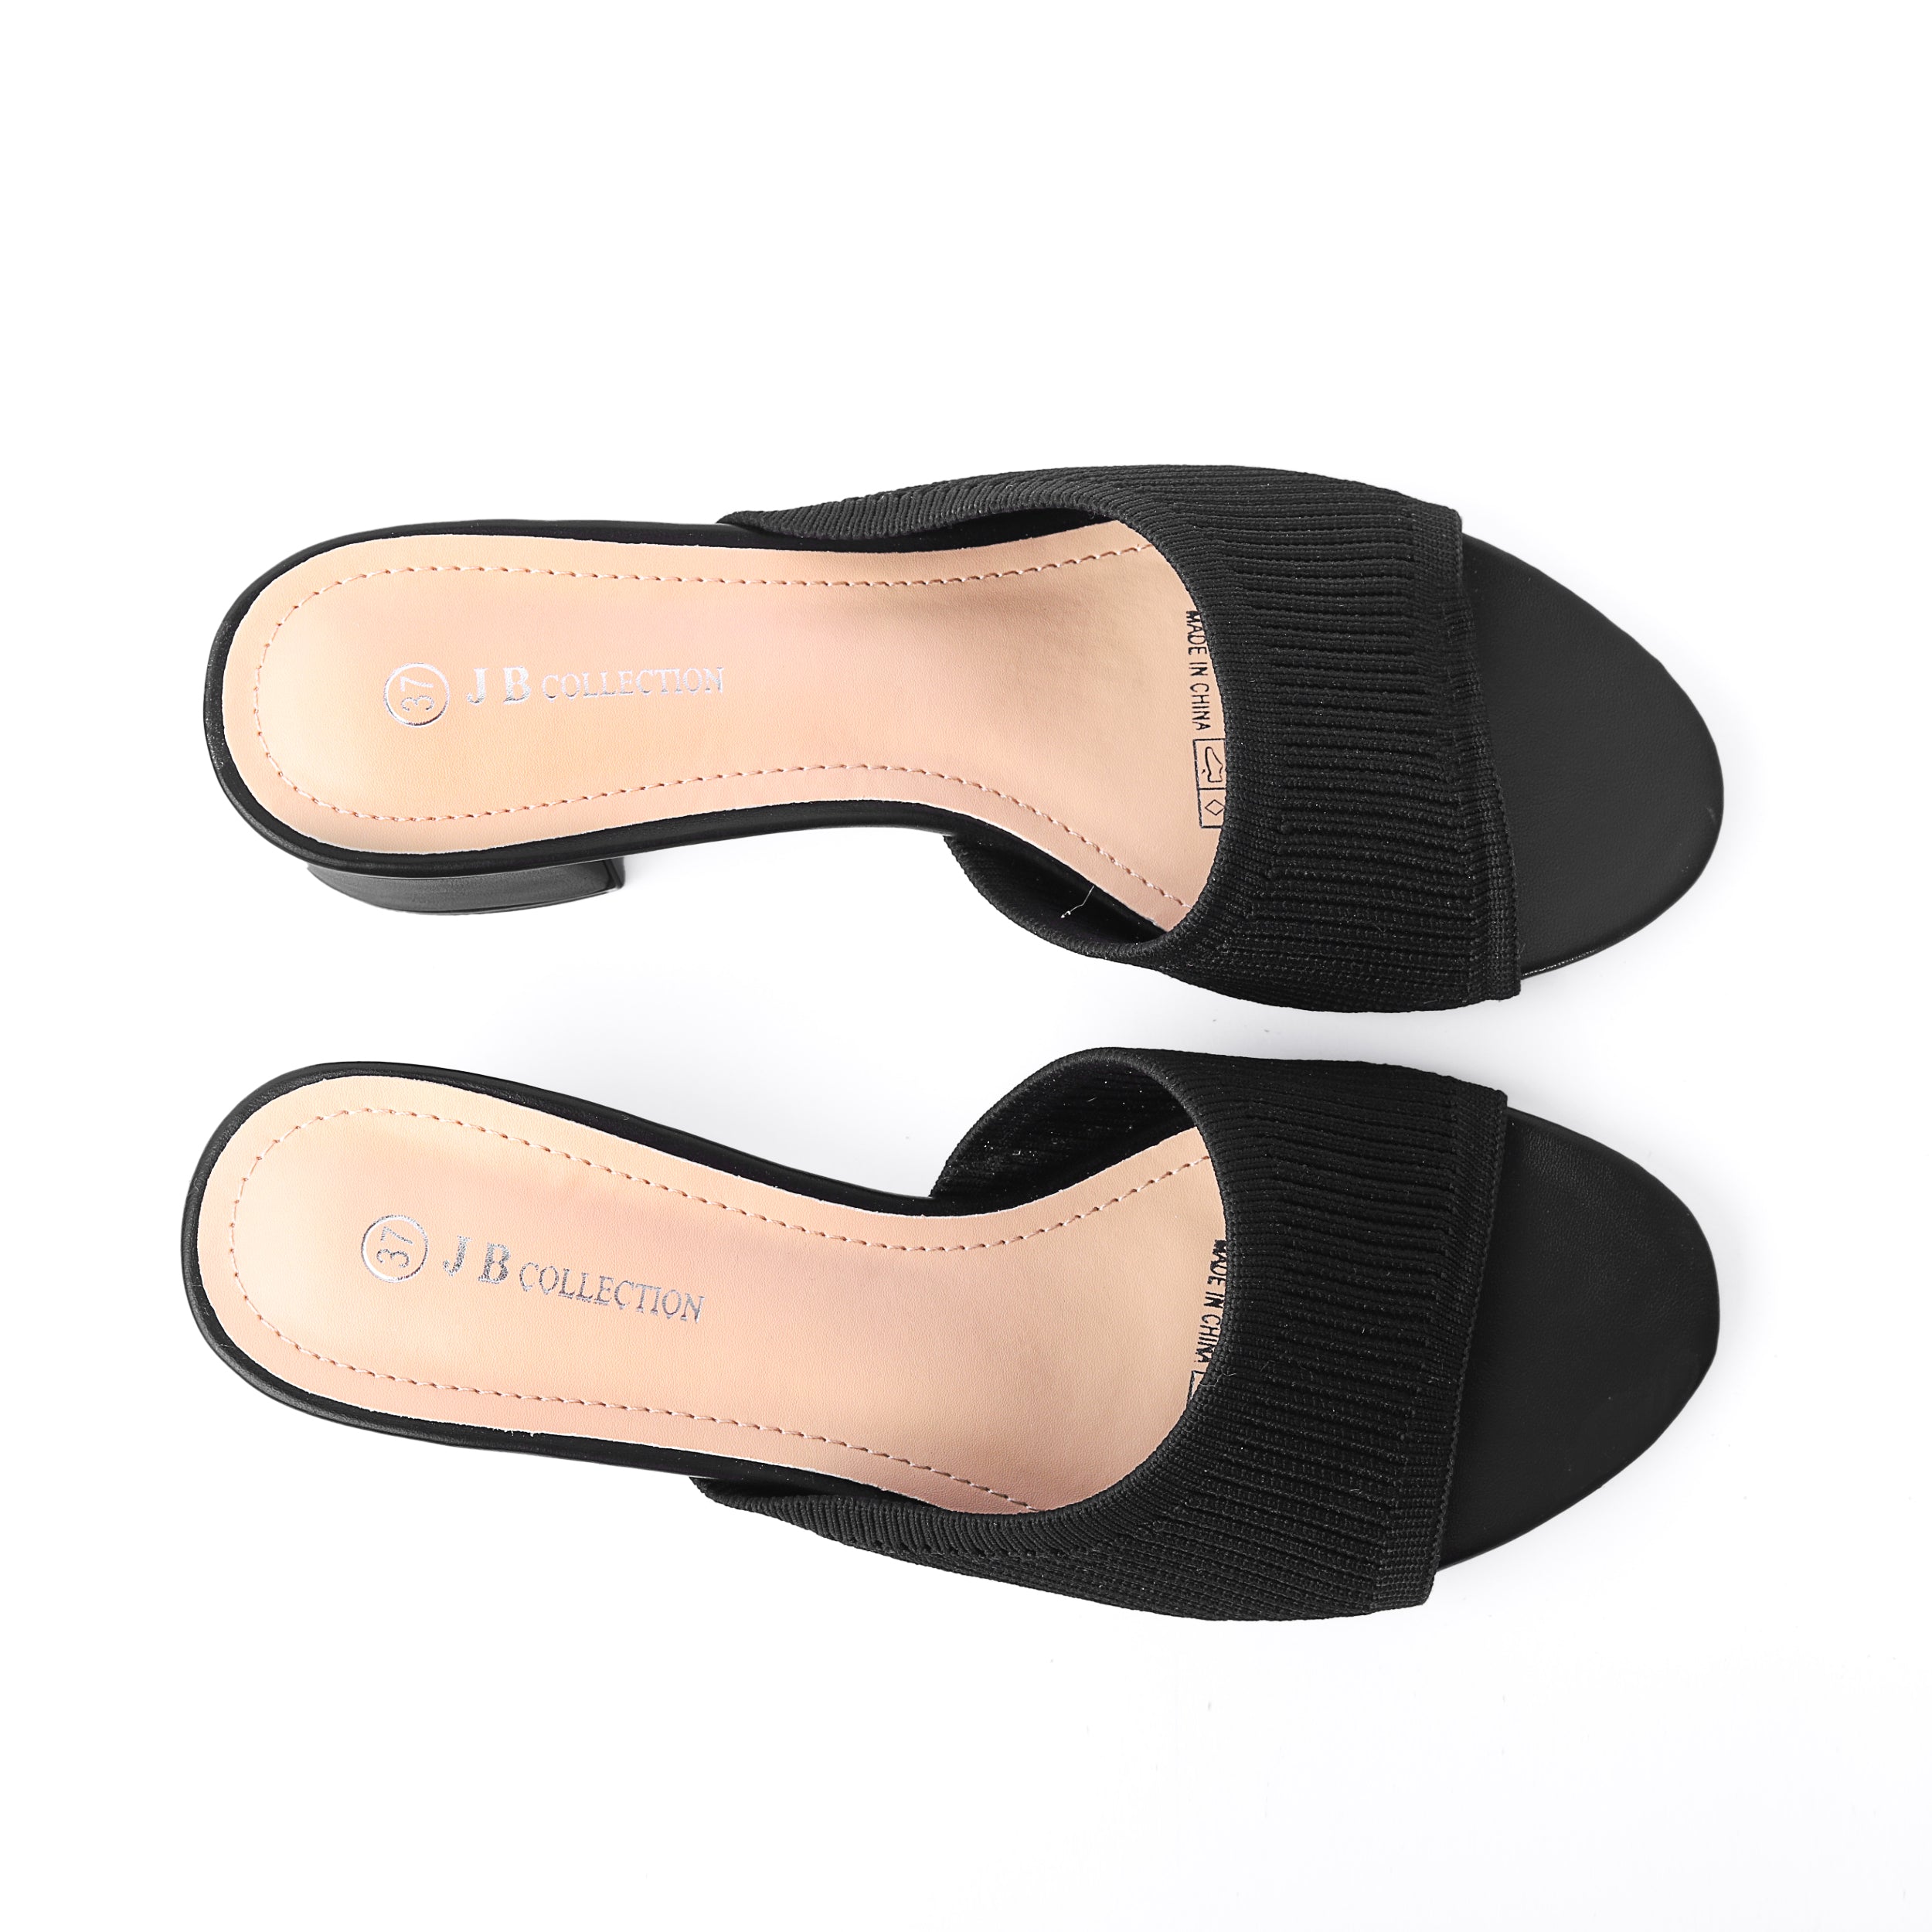 JB Collection High Heel Leather Slipper -A64